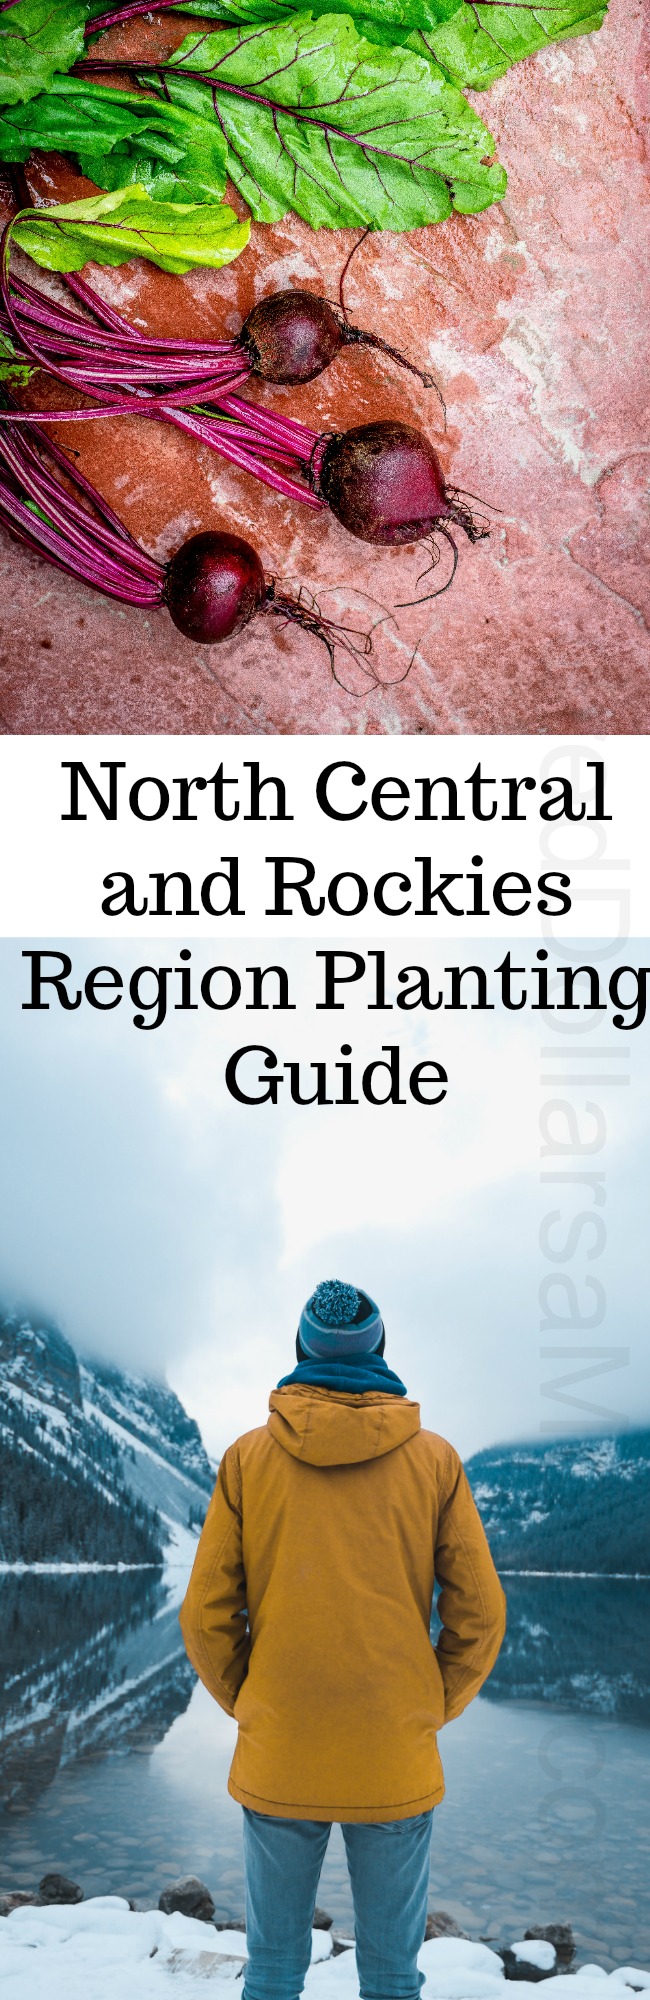 North Central and Rockies Region Planting Guide